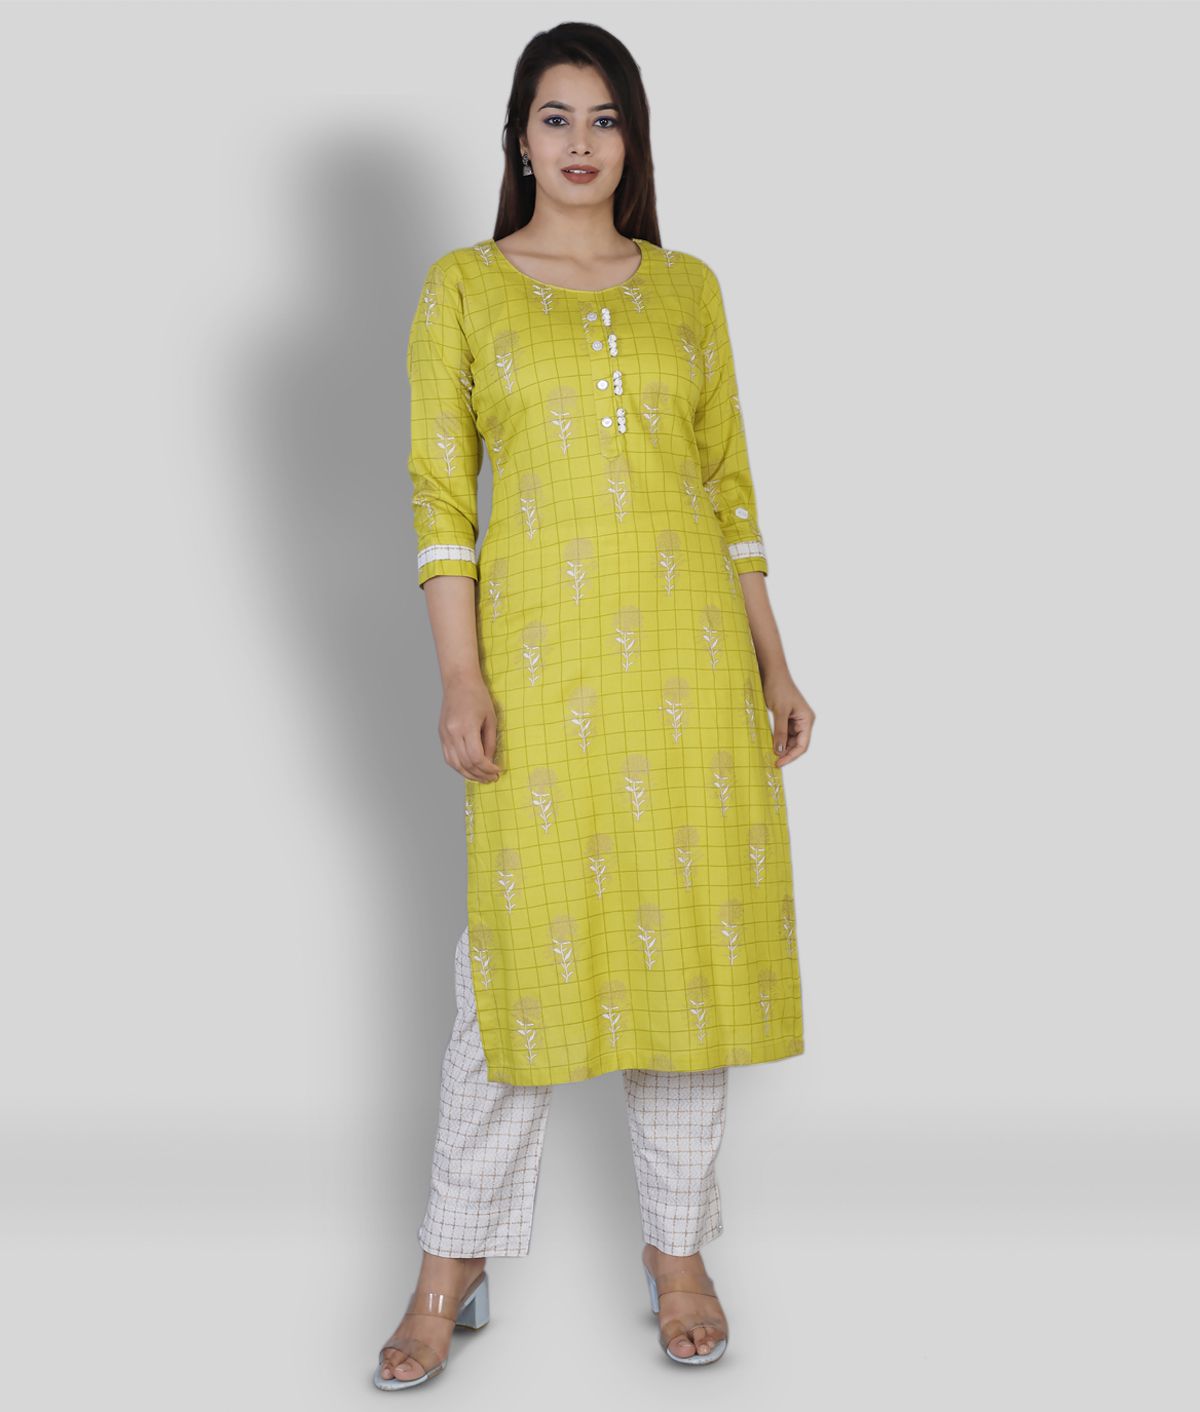     			JC4U - Yellow Straight Rayon Women's Stitched Salwar Suit ( Pack of 1 )